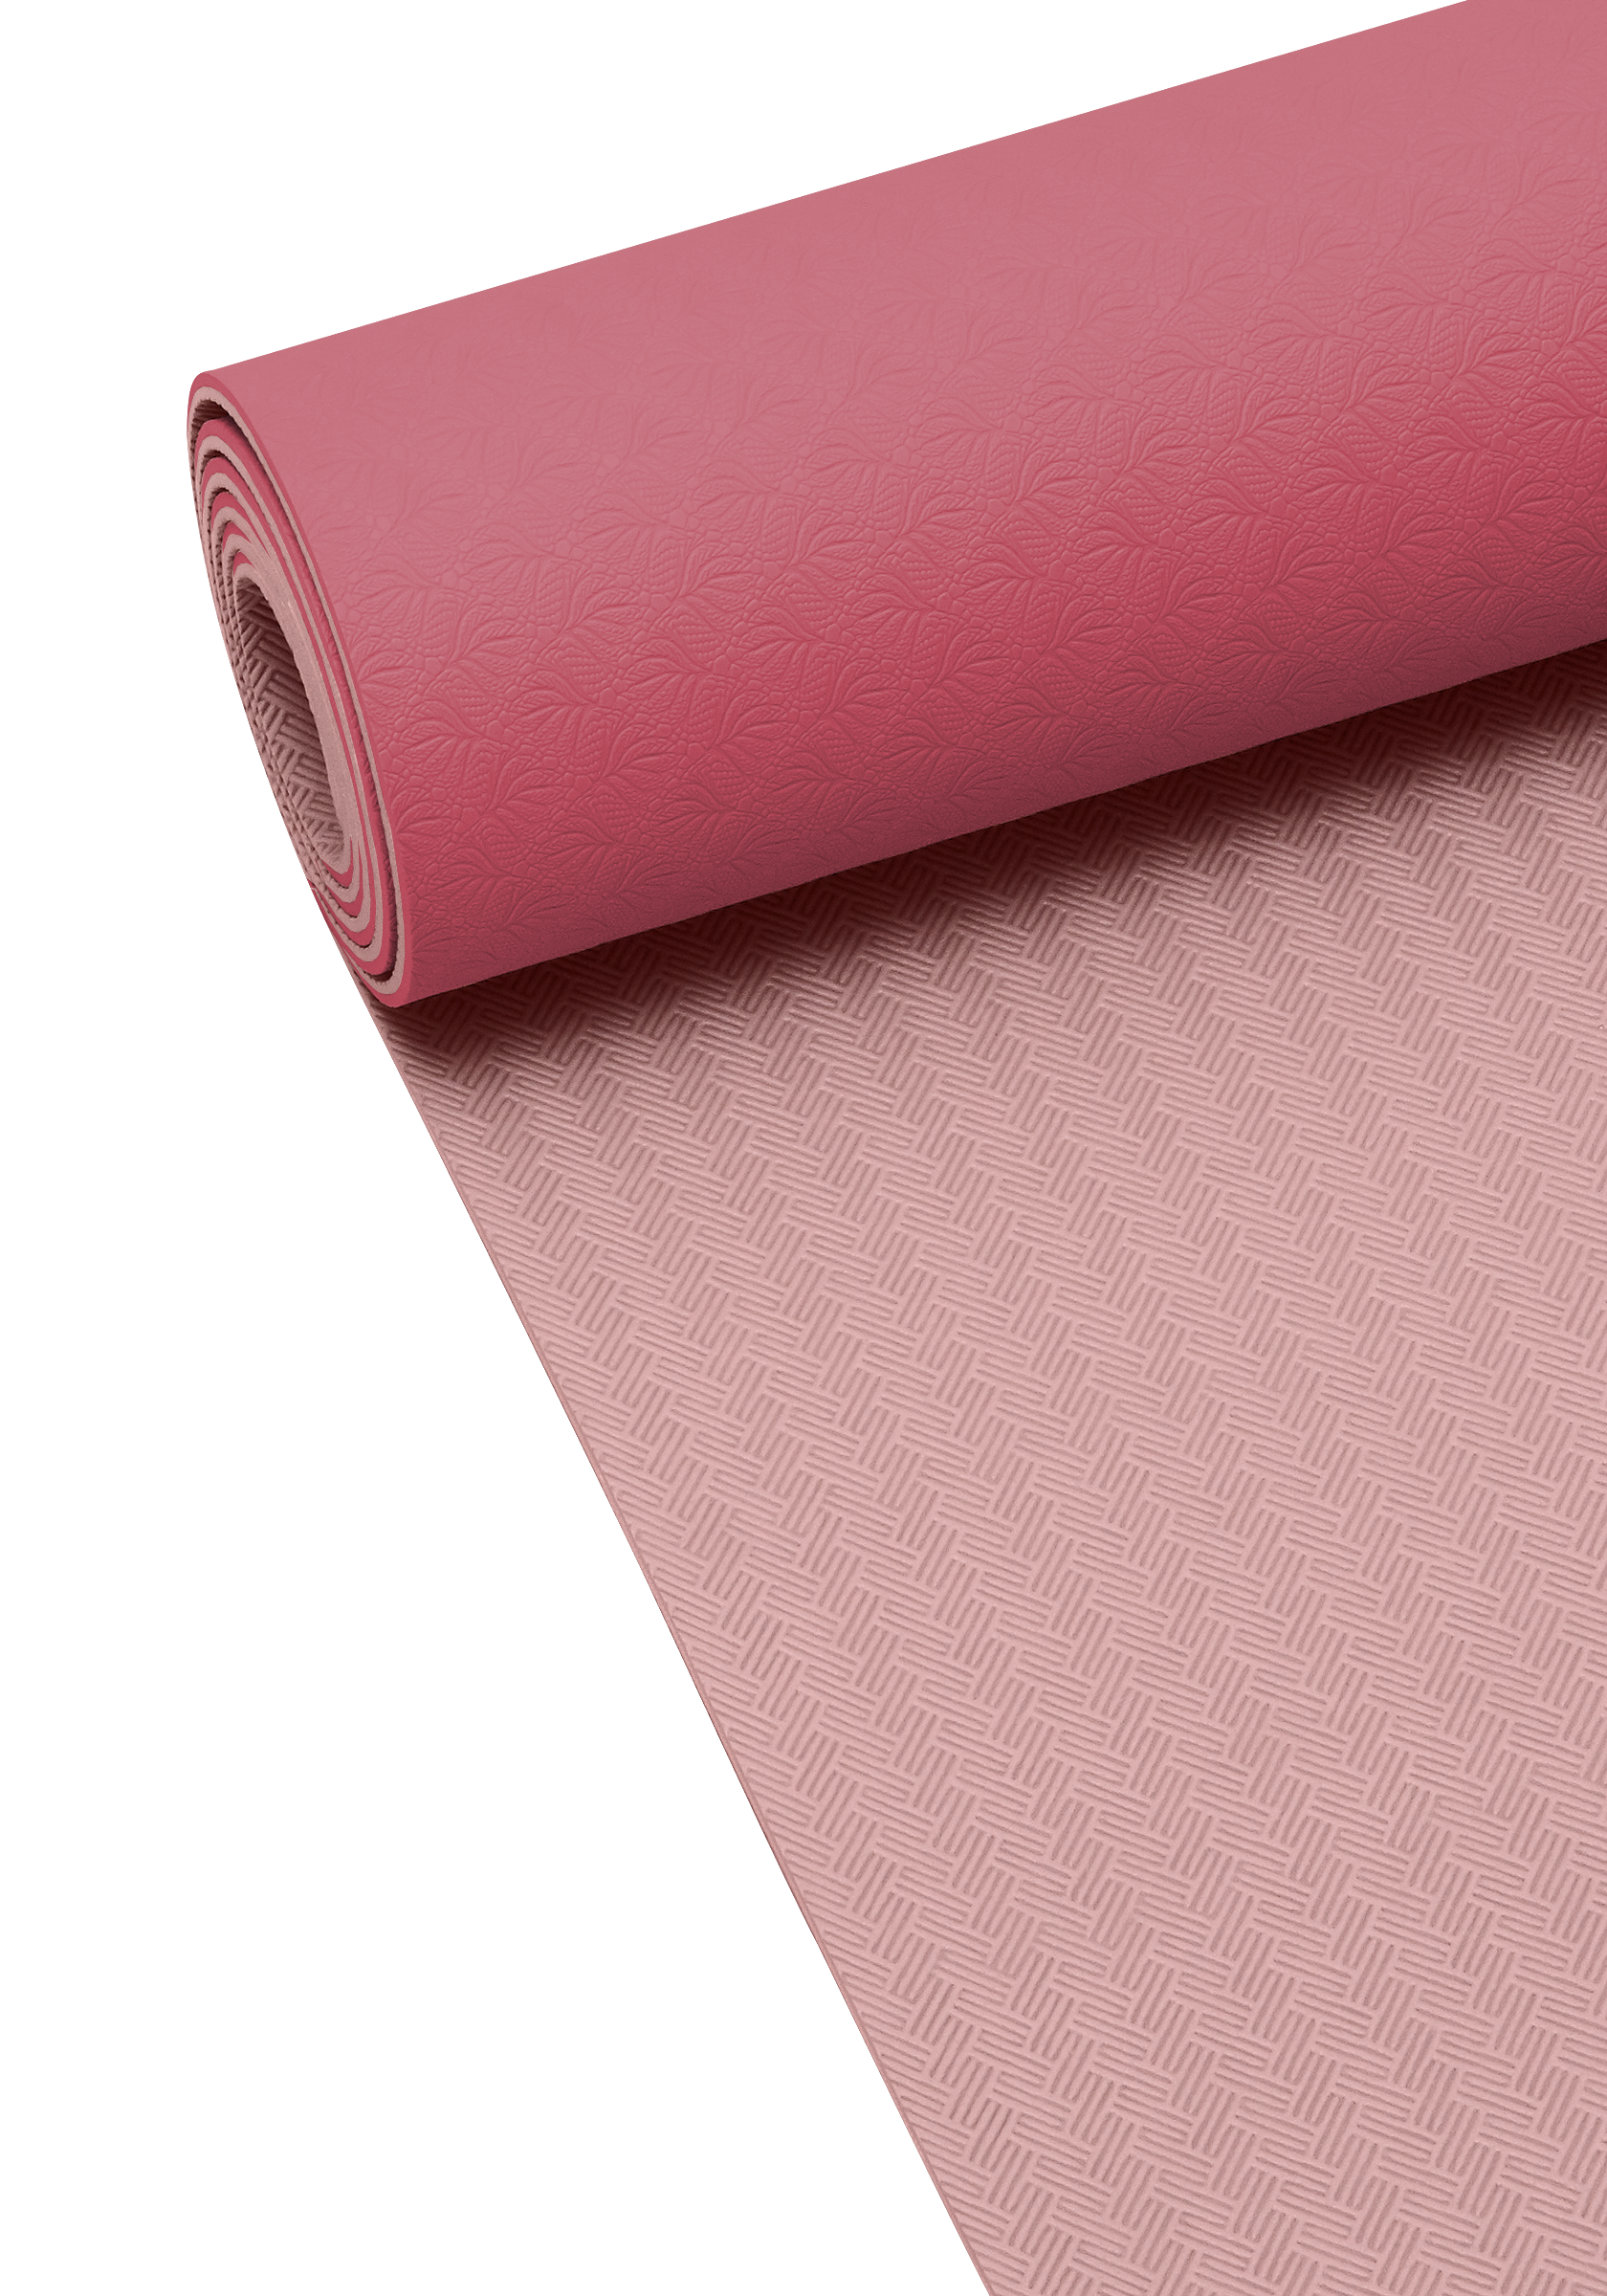 Yoga mat position 4mm - Mineral Pink